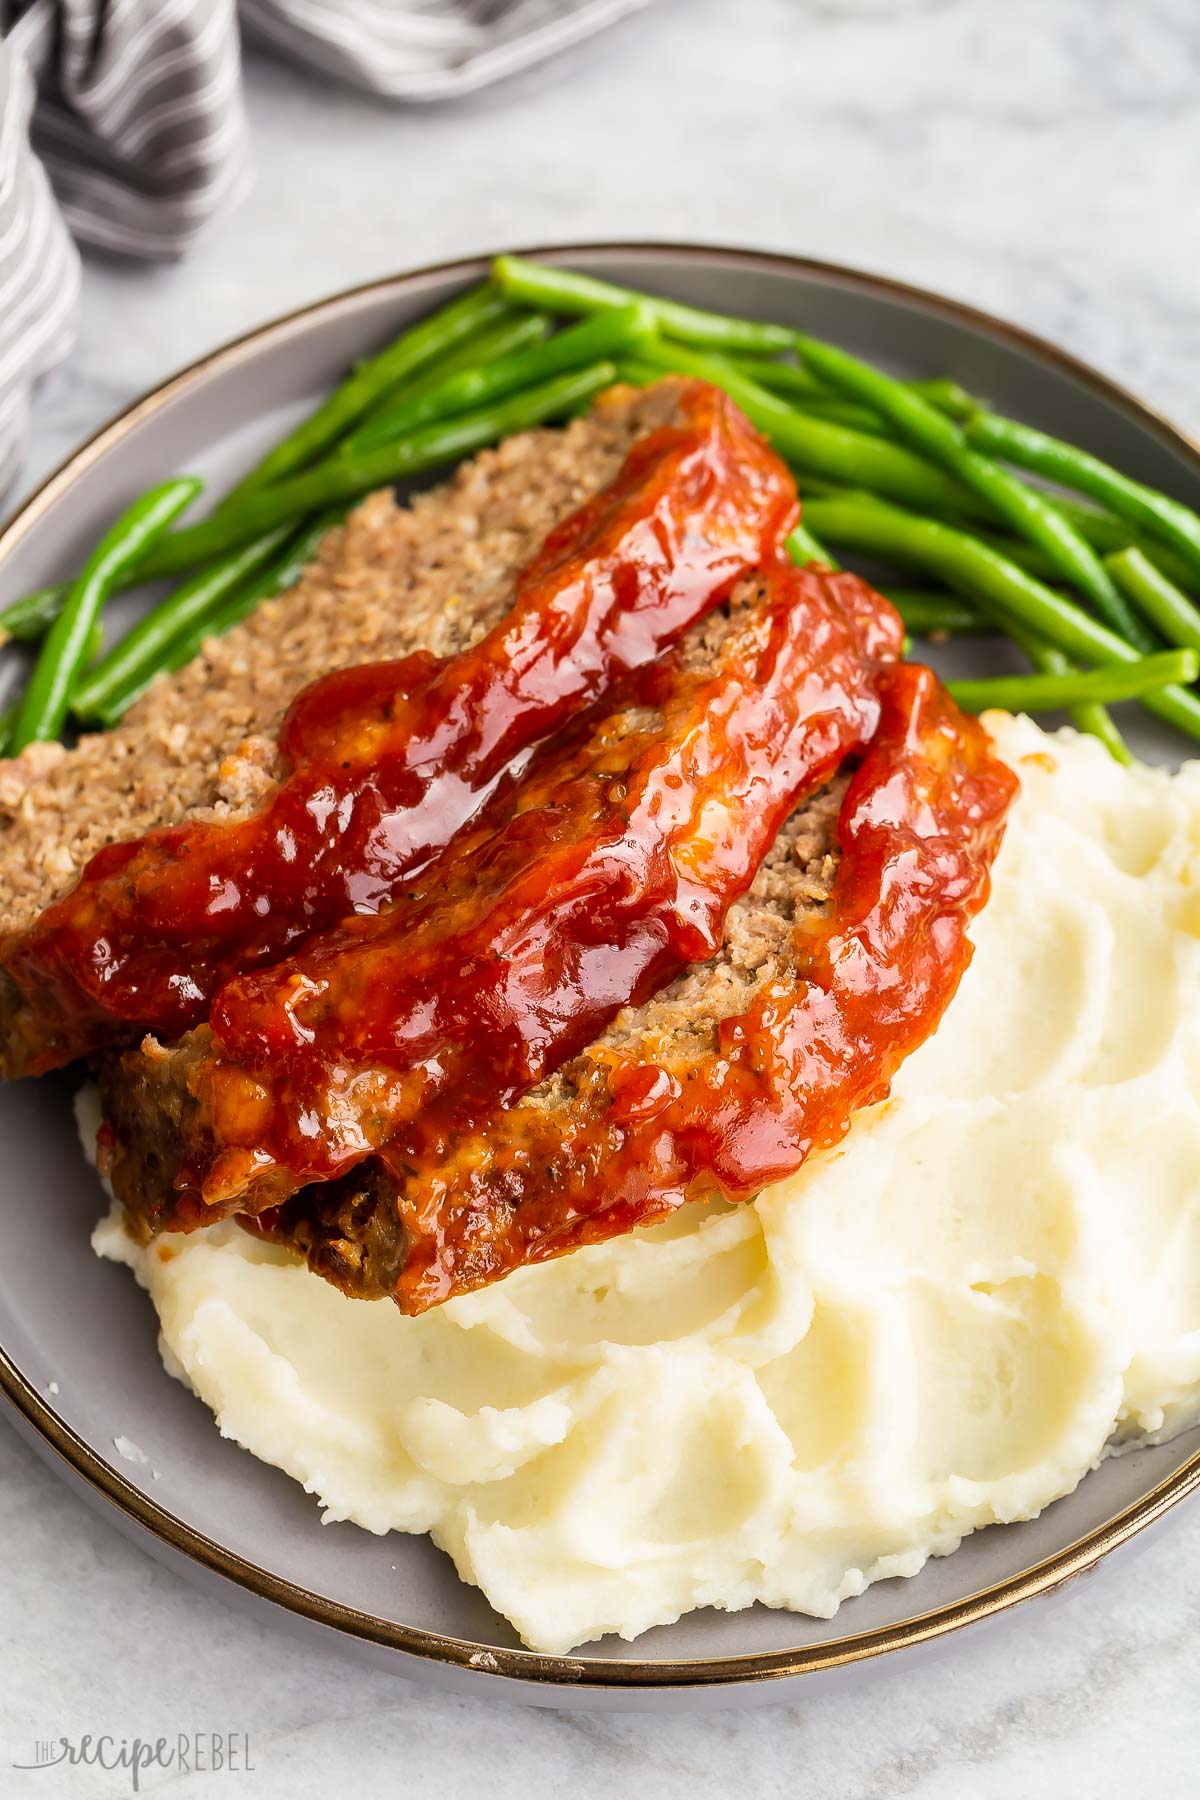 close up image of three slices of meatloaf with mashed potatoes and green beans.